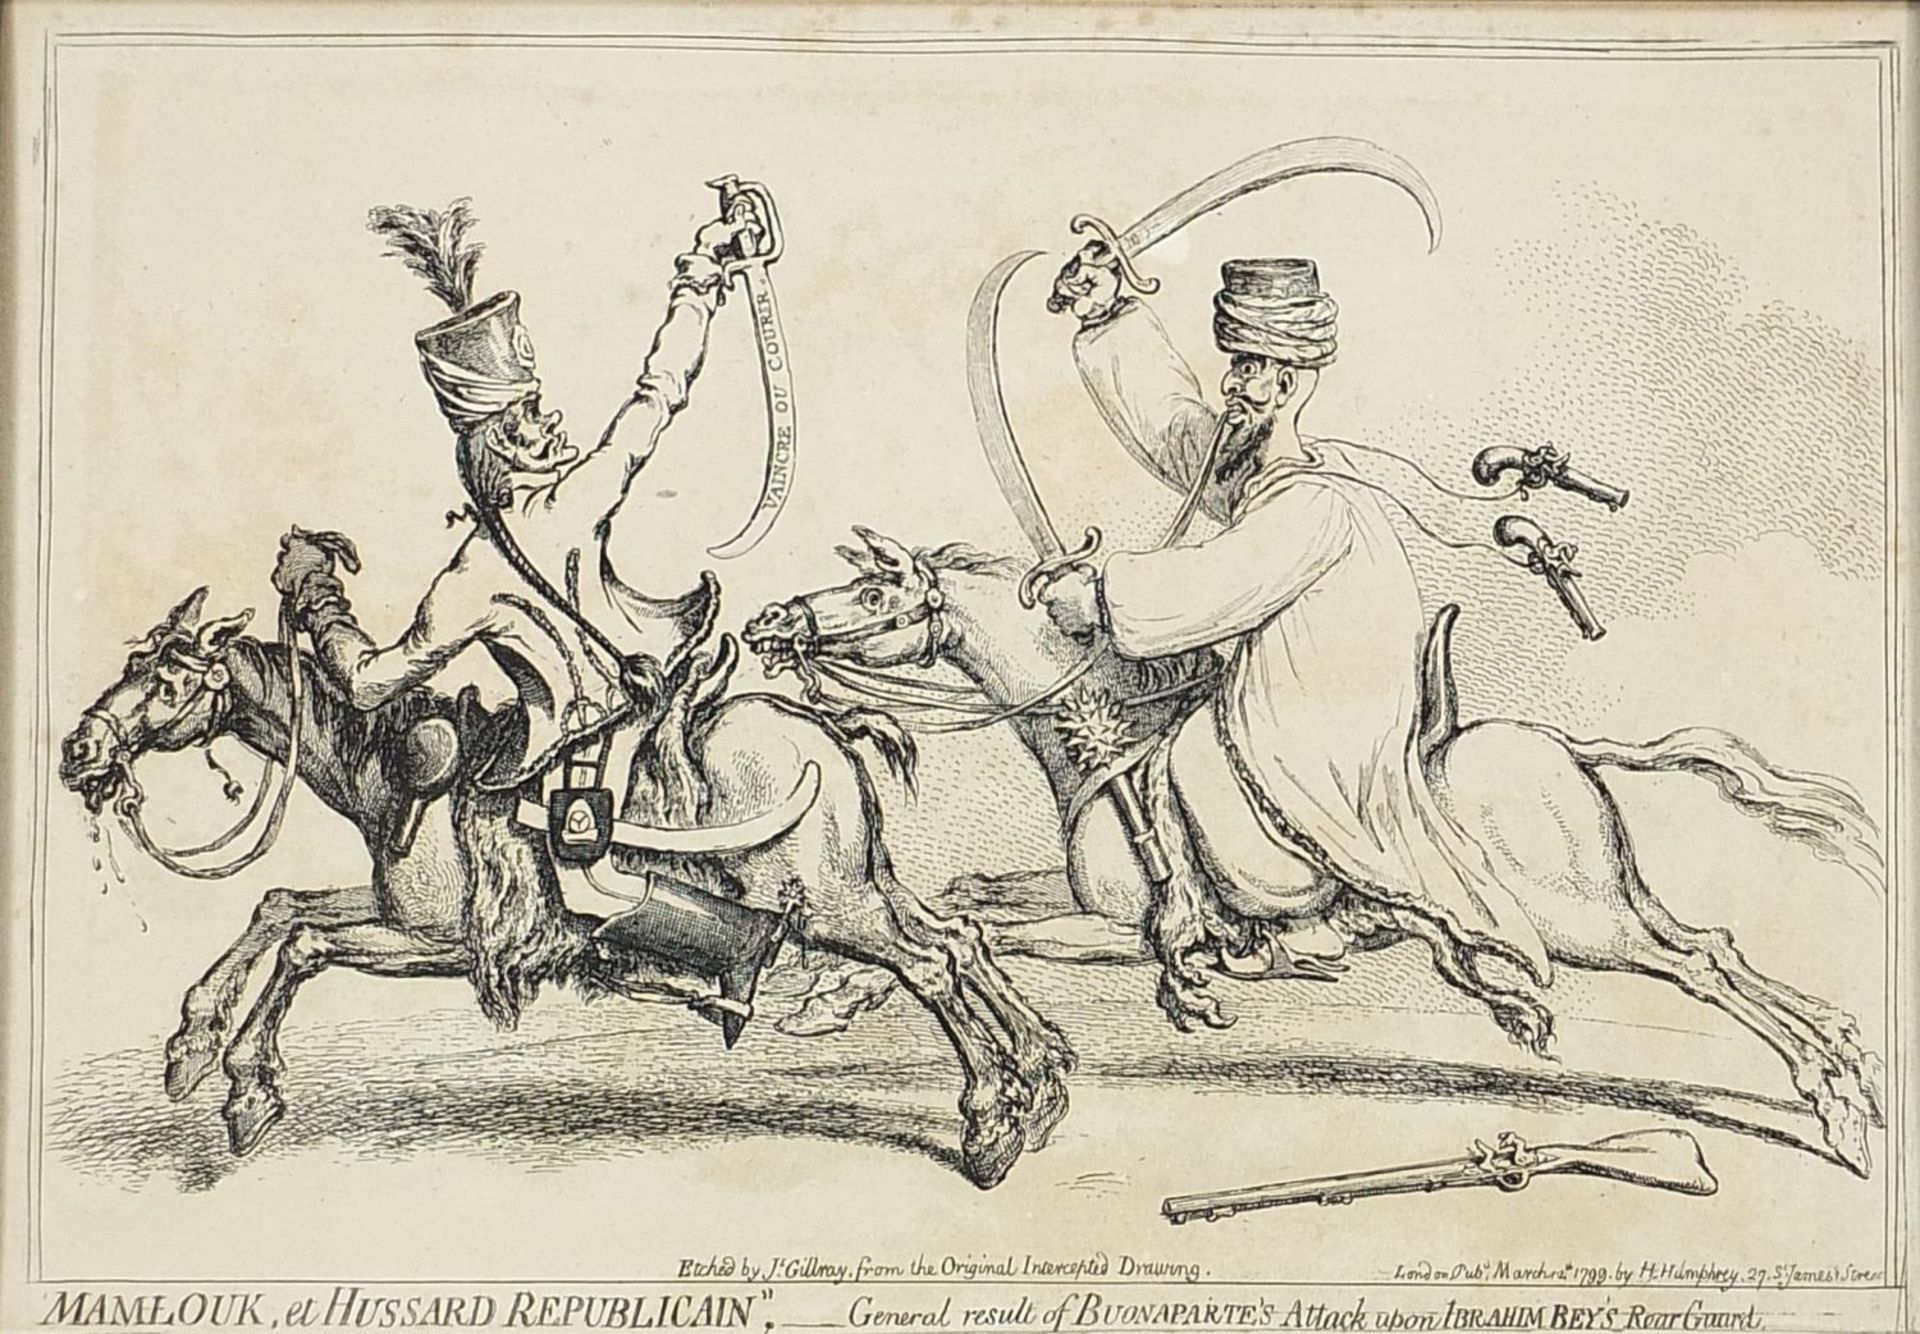 After James Gillray - Memouk et Hussard Republican, etching, published 1799 by H Humphrey, London,